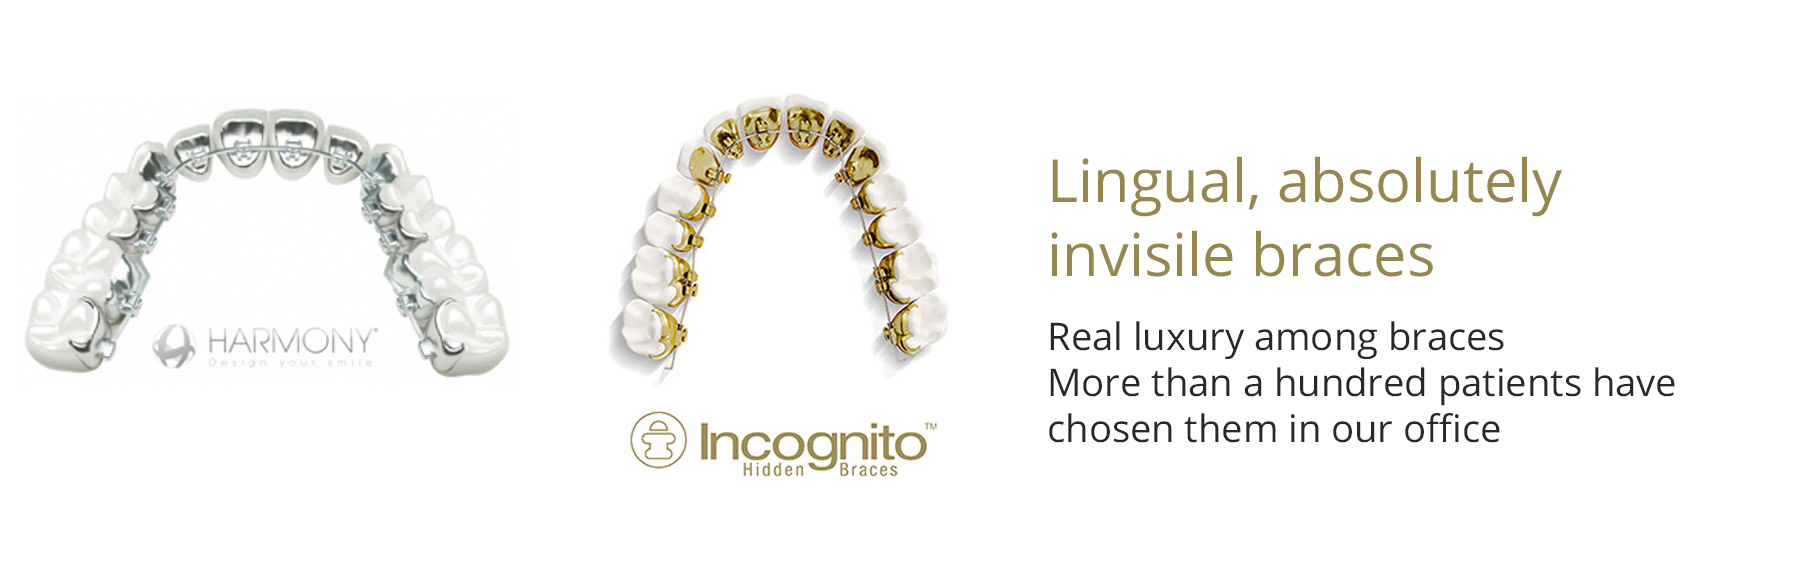 HP lingual, absolutely invisile braces